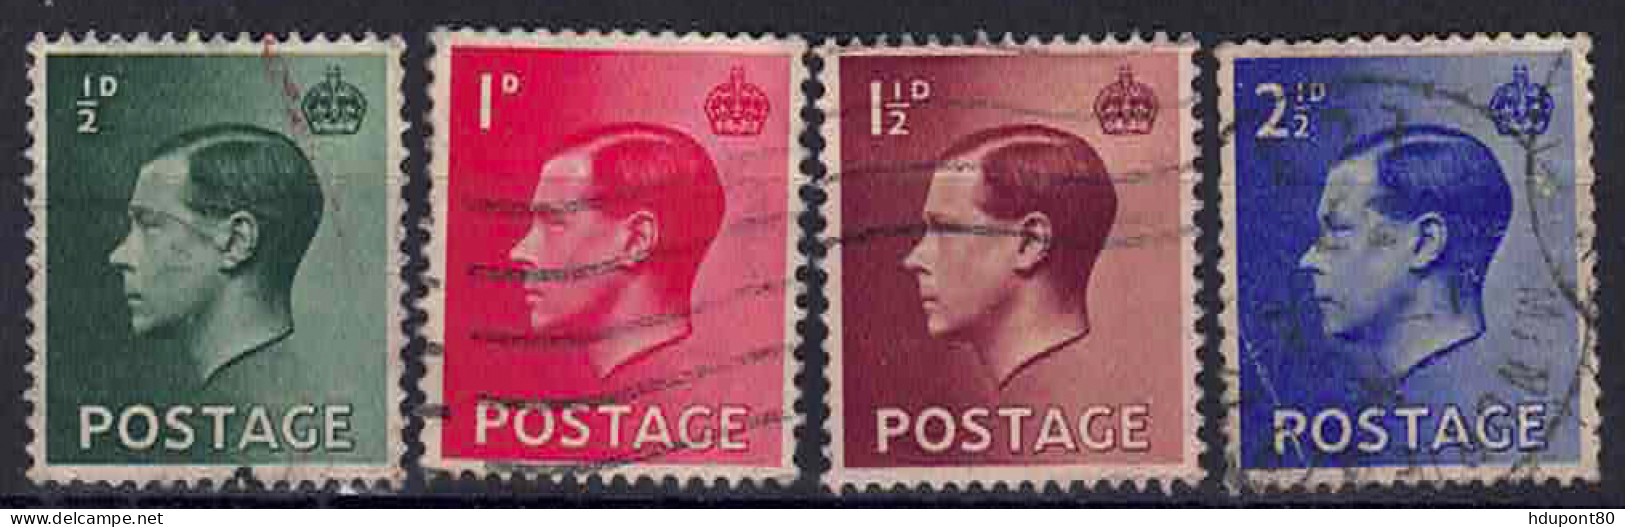 YT 205 à 208 - Used Stamps